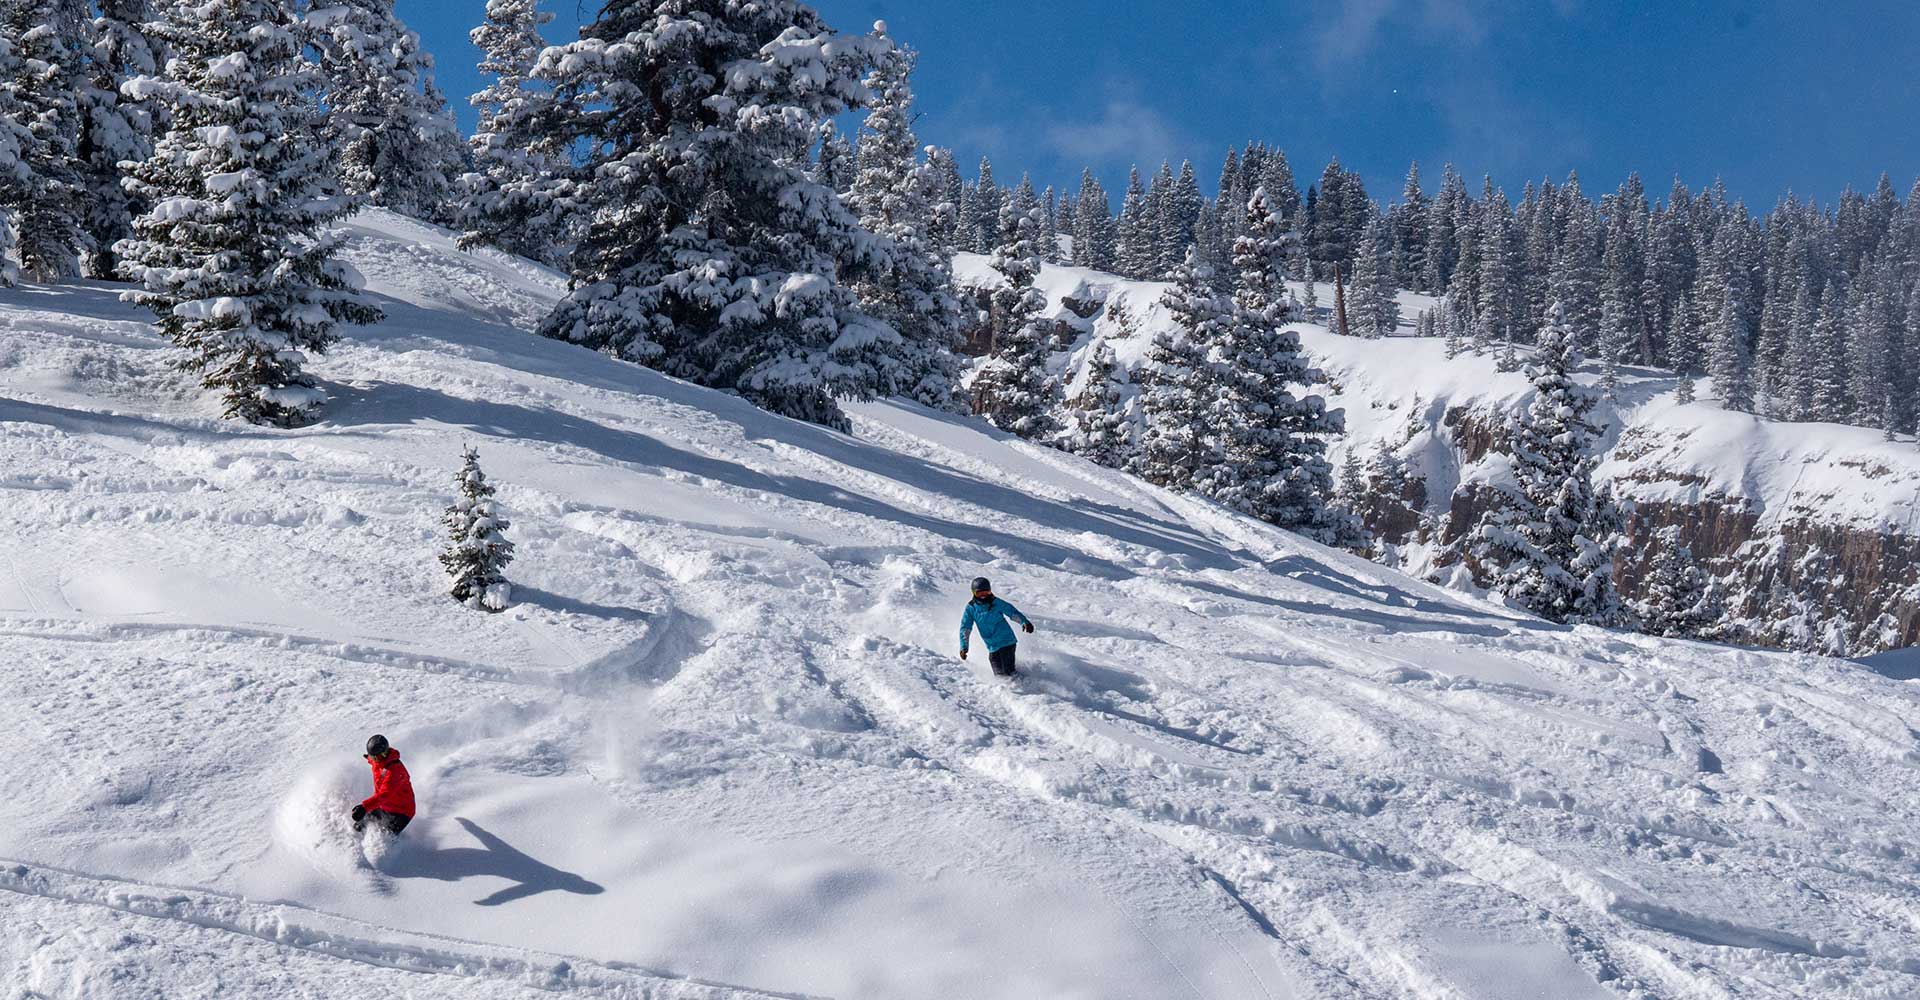 Two advanced snowboarders carve turns through Snowmass' famed glades.